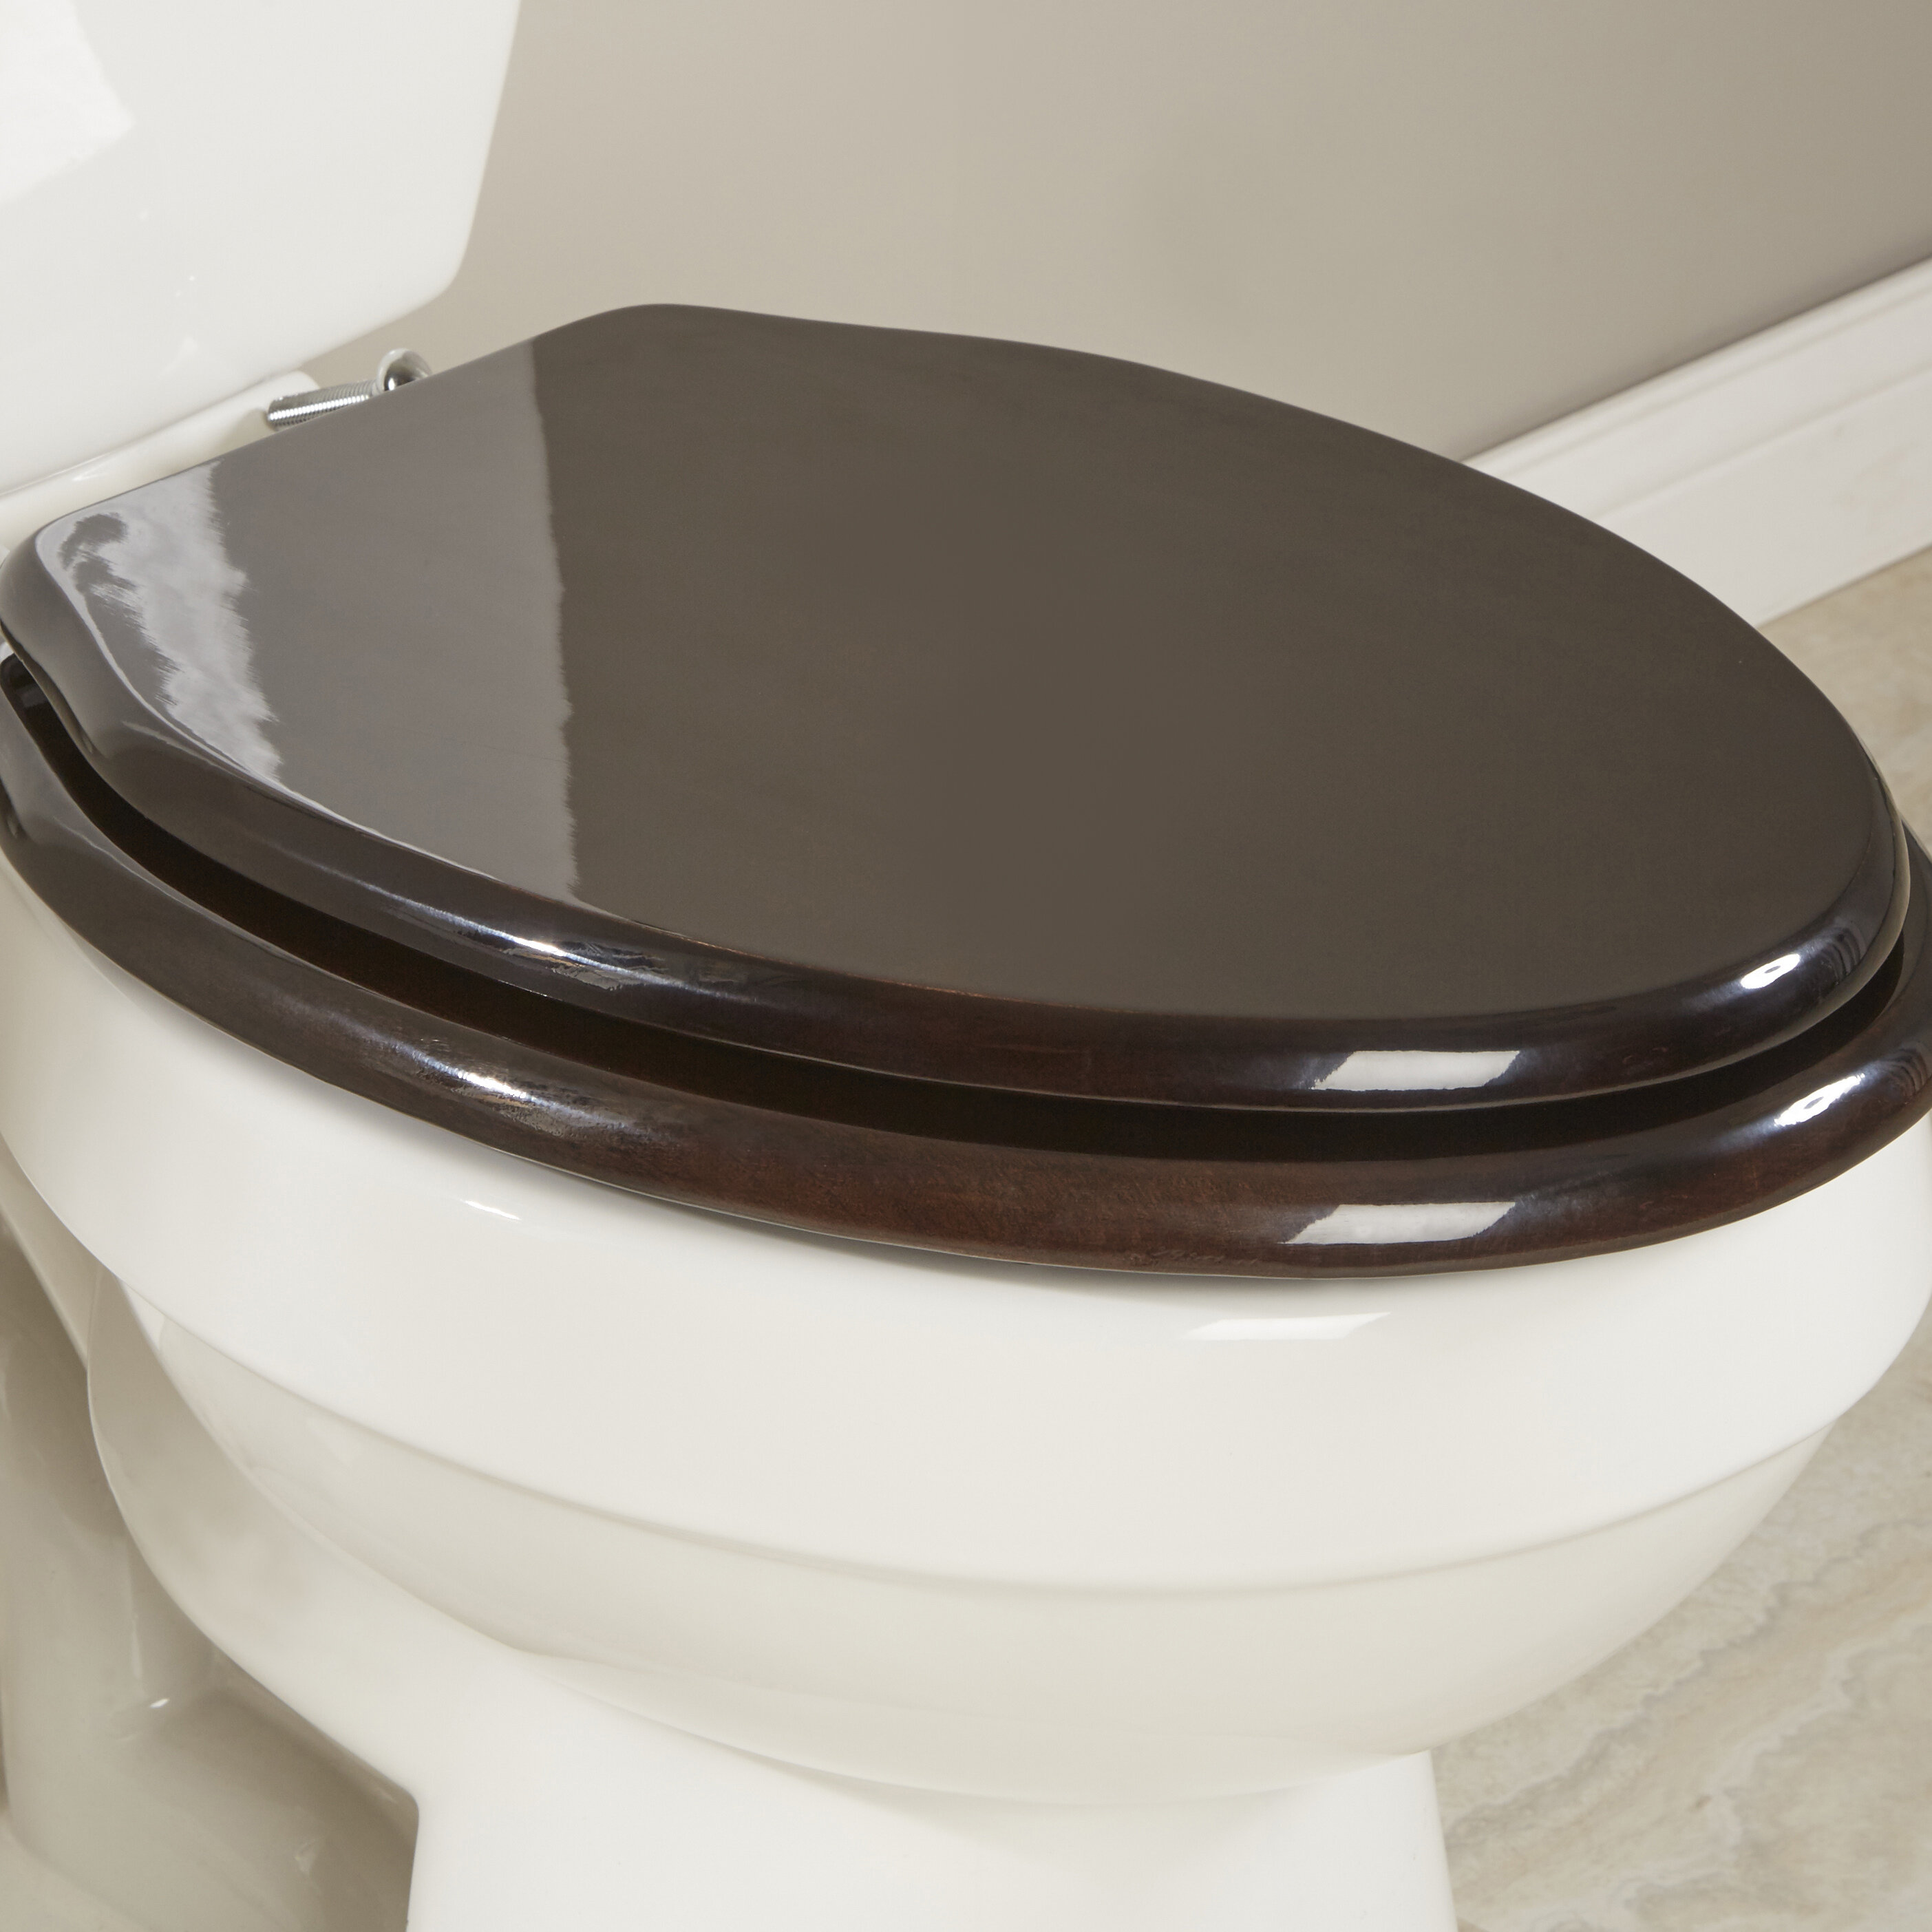 trimmer toilet seat